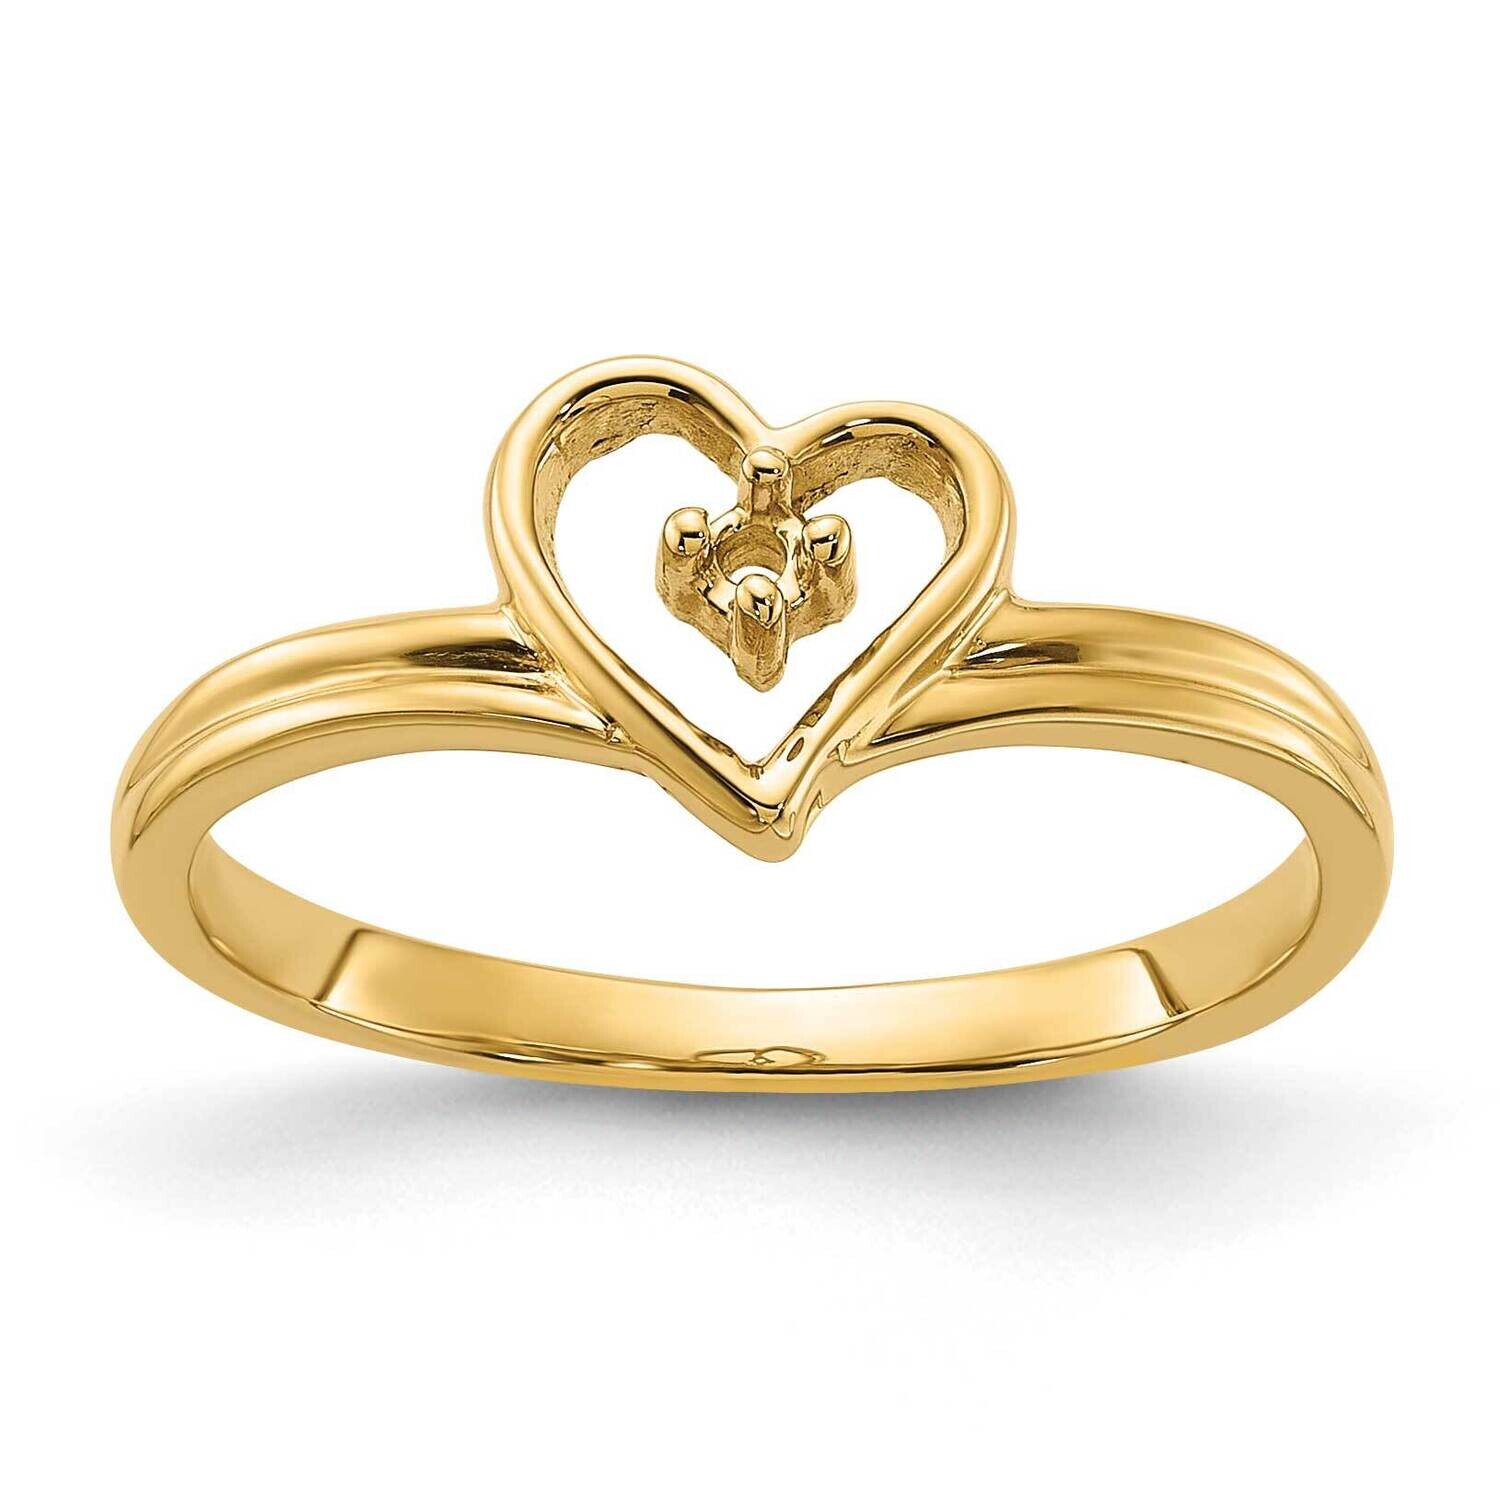 0.03ct. Diamond Heart Ring Mounting 14k Gold Polished Y1780